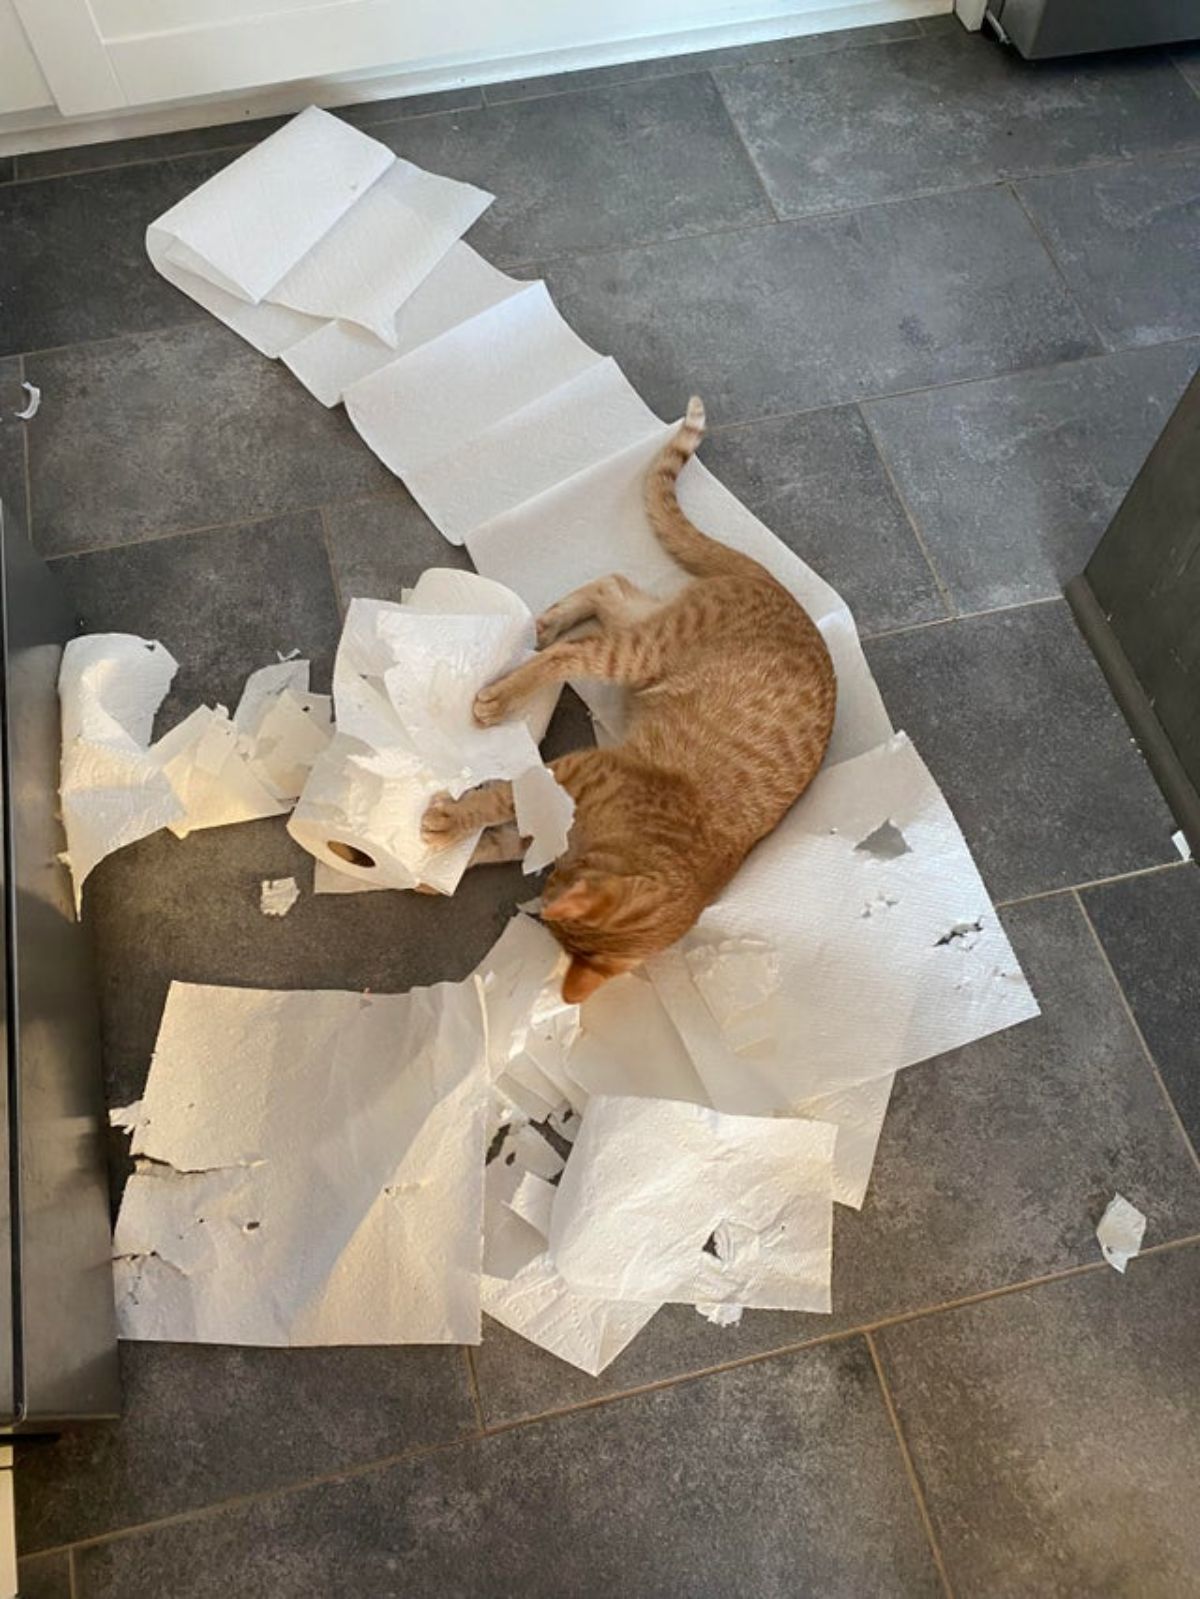 orange cat laying on white paper towels ripped up from the rolls